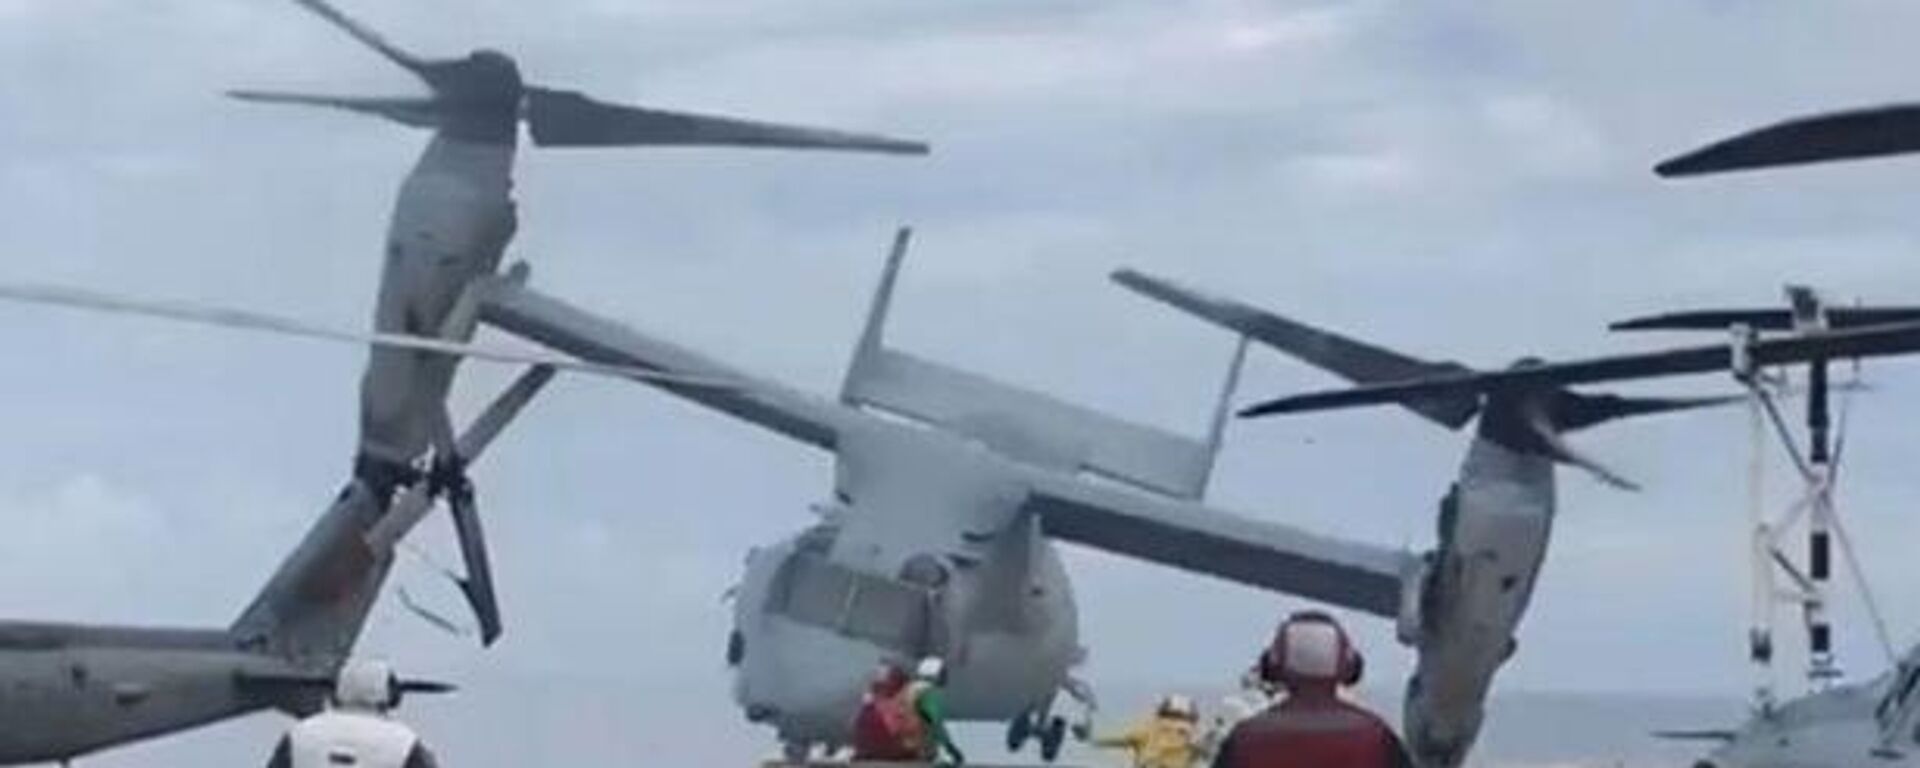 The MV-22 Osprey helicopter crashed over the side of a US warship in 2017 with deadly consequences - Sputnik International, 1920, 04.07.2022